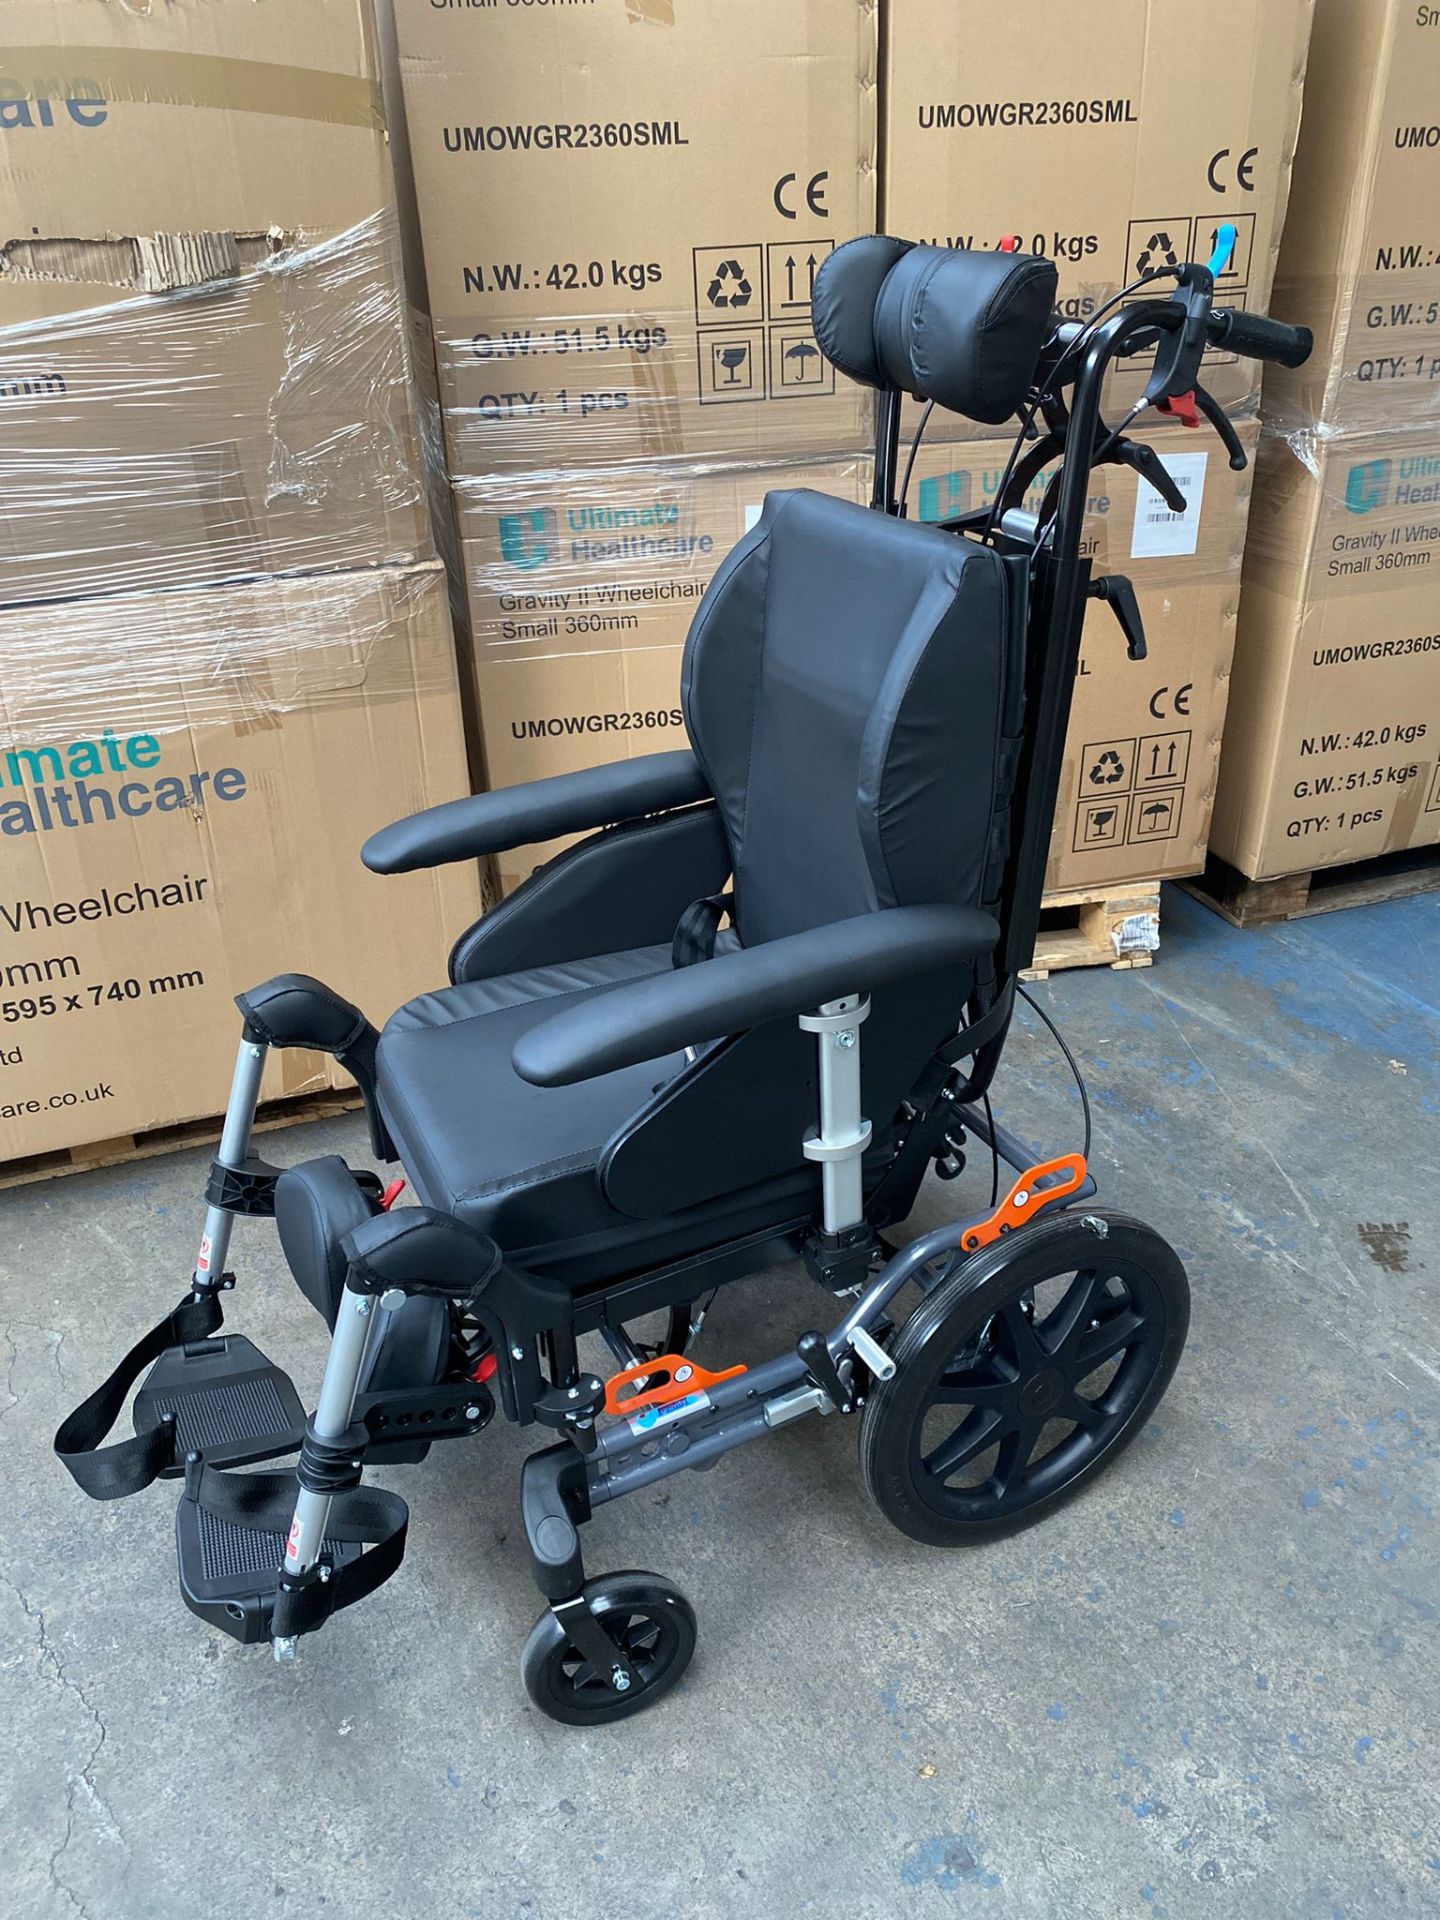 BRAND NEW Gravity 2 Tilt In Space Wheel Chair SIZE SMALL 360MM RRP £1500 - Image 2 of 2